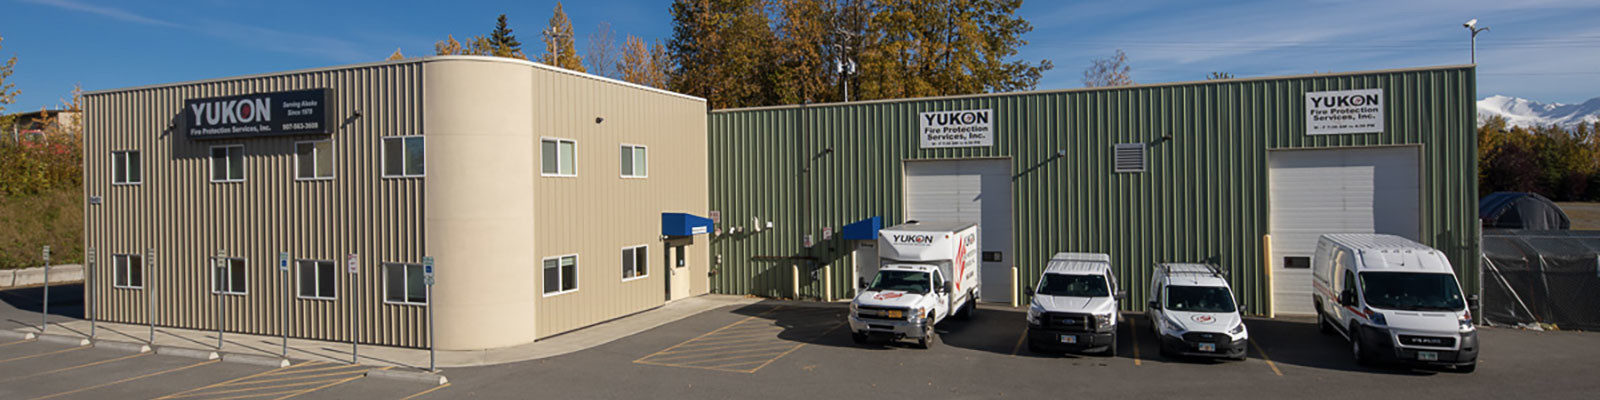 Yukon Fire Protection, new building exterior